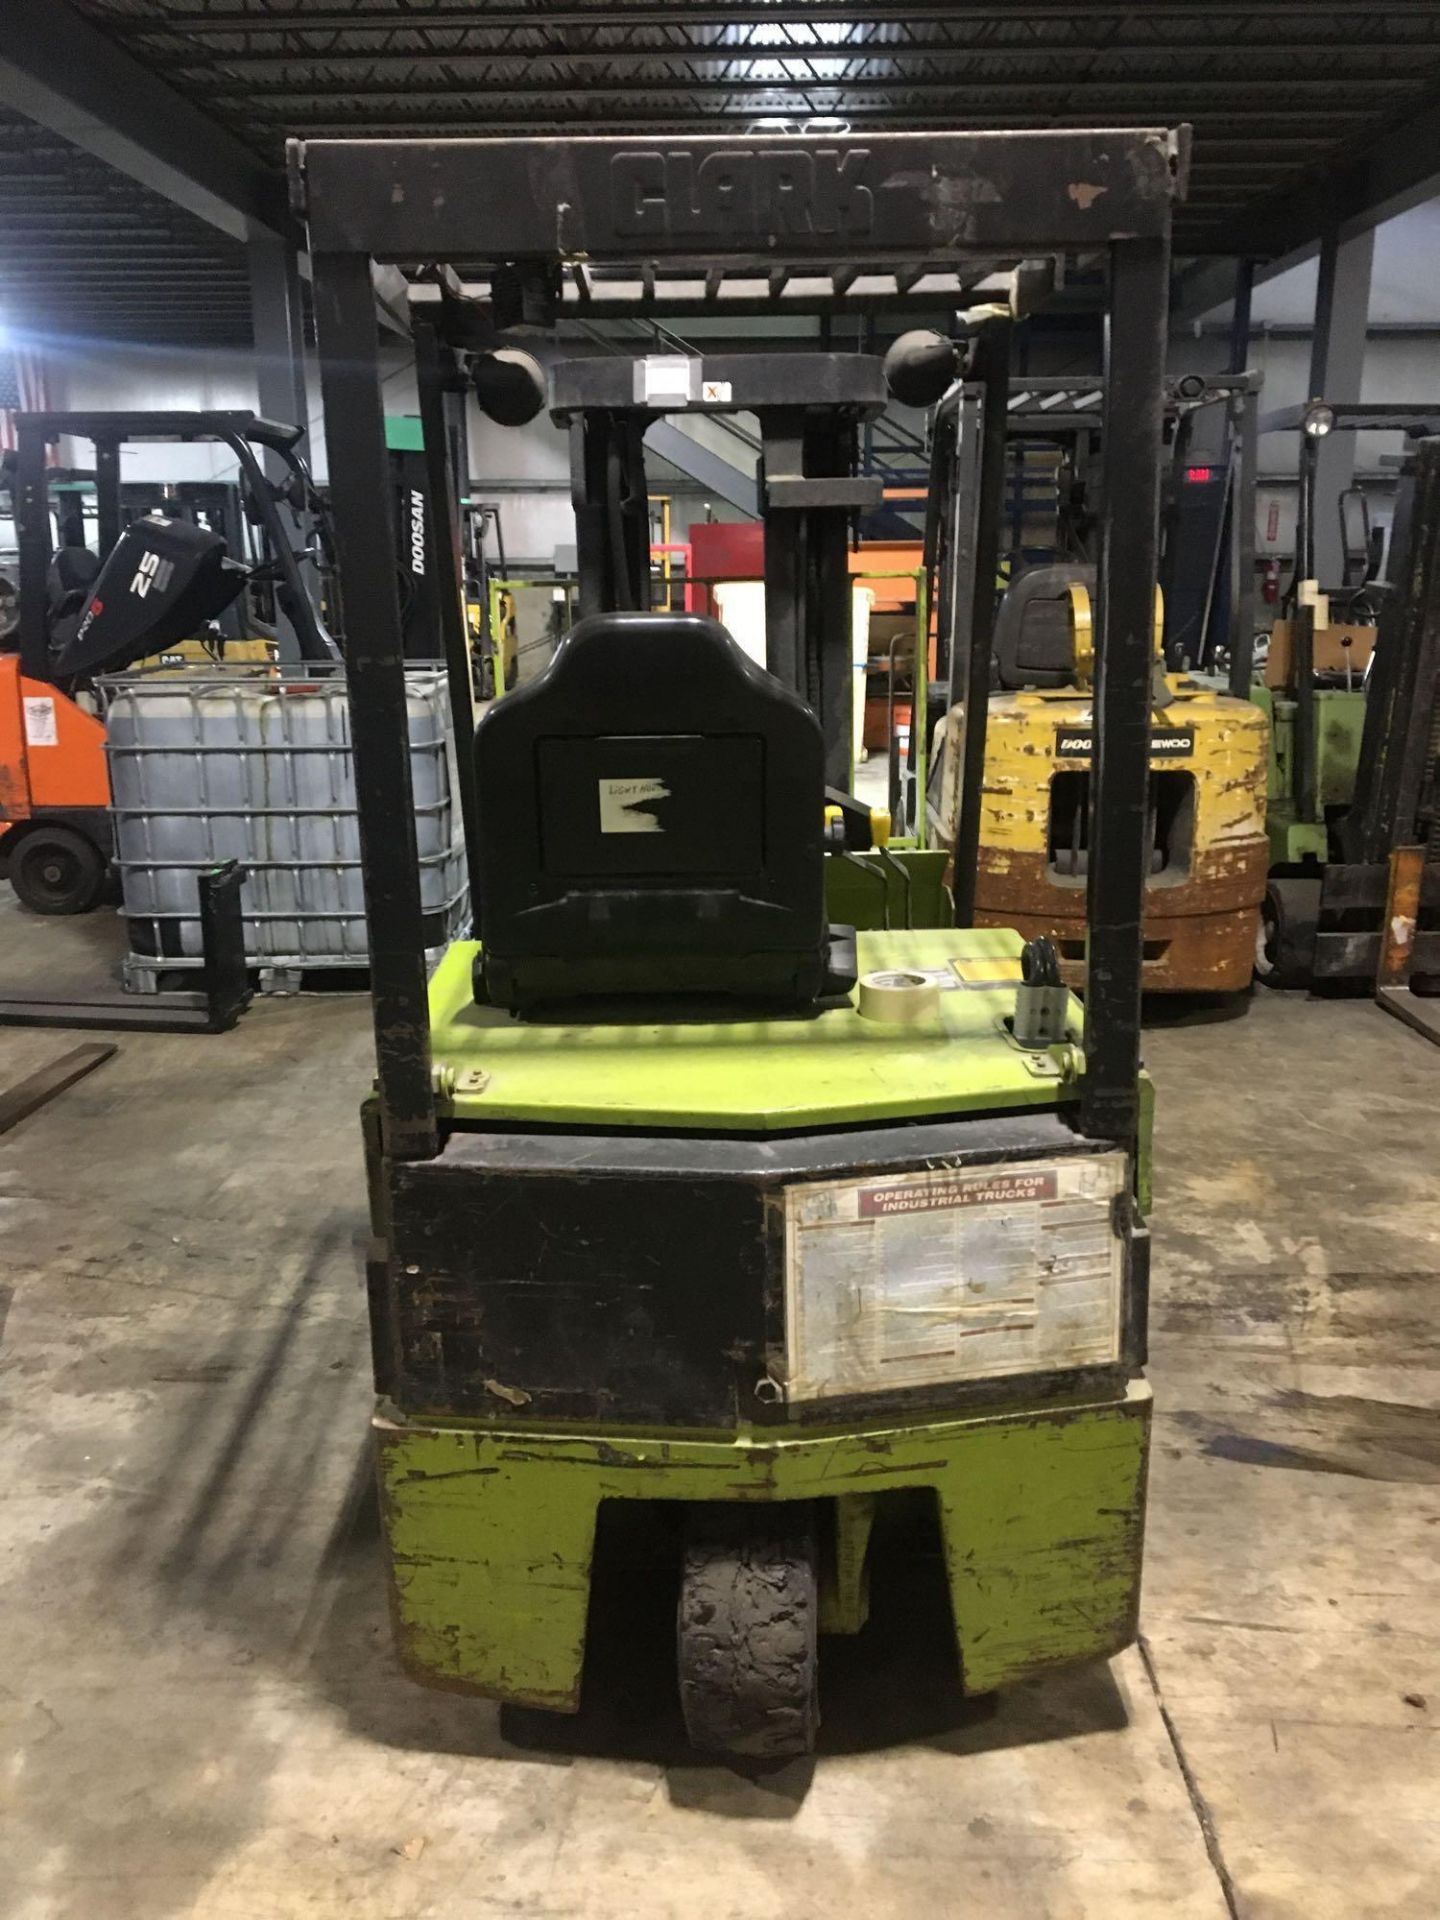 Electric Forklift, Clark, TM20, Max Ht 170", Max Cap 3425lbs, Hrs Unknown - Image 6 of 8